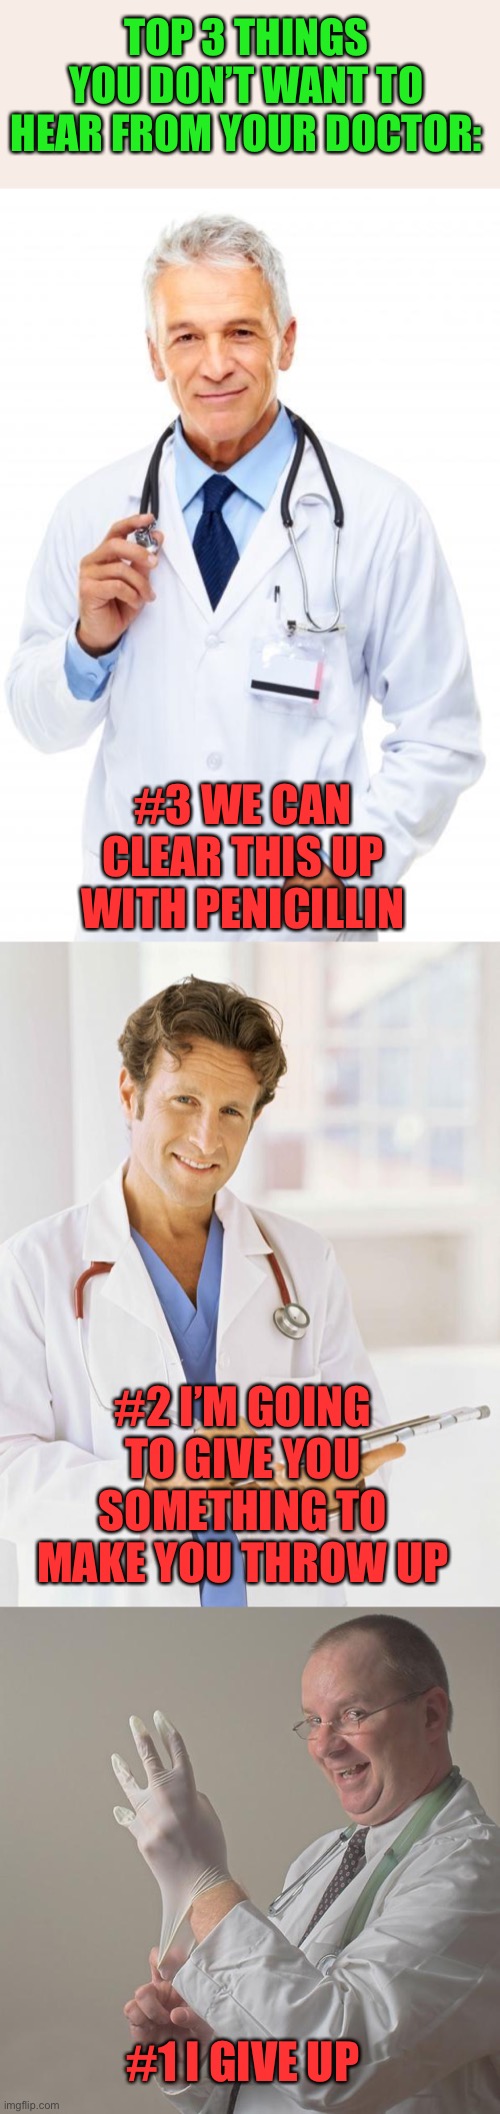 Bad news you don’t want from the Dr. | TOP 3 THINGS YOU DON’T WANT TO HEAR FROM YOUR DOCTOR:; #3 WE CAN CLEAR THIS UP WITH PENICILLIN; #2 I’M GOING TO GIVE YOU SOMETHING TO MAKE YOU THROW UP; #1 I GIVE UP | image tagged in doctor,insane doctor | made w/ Imgflip meme maker